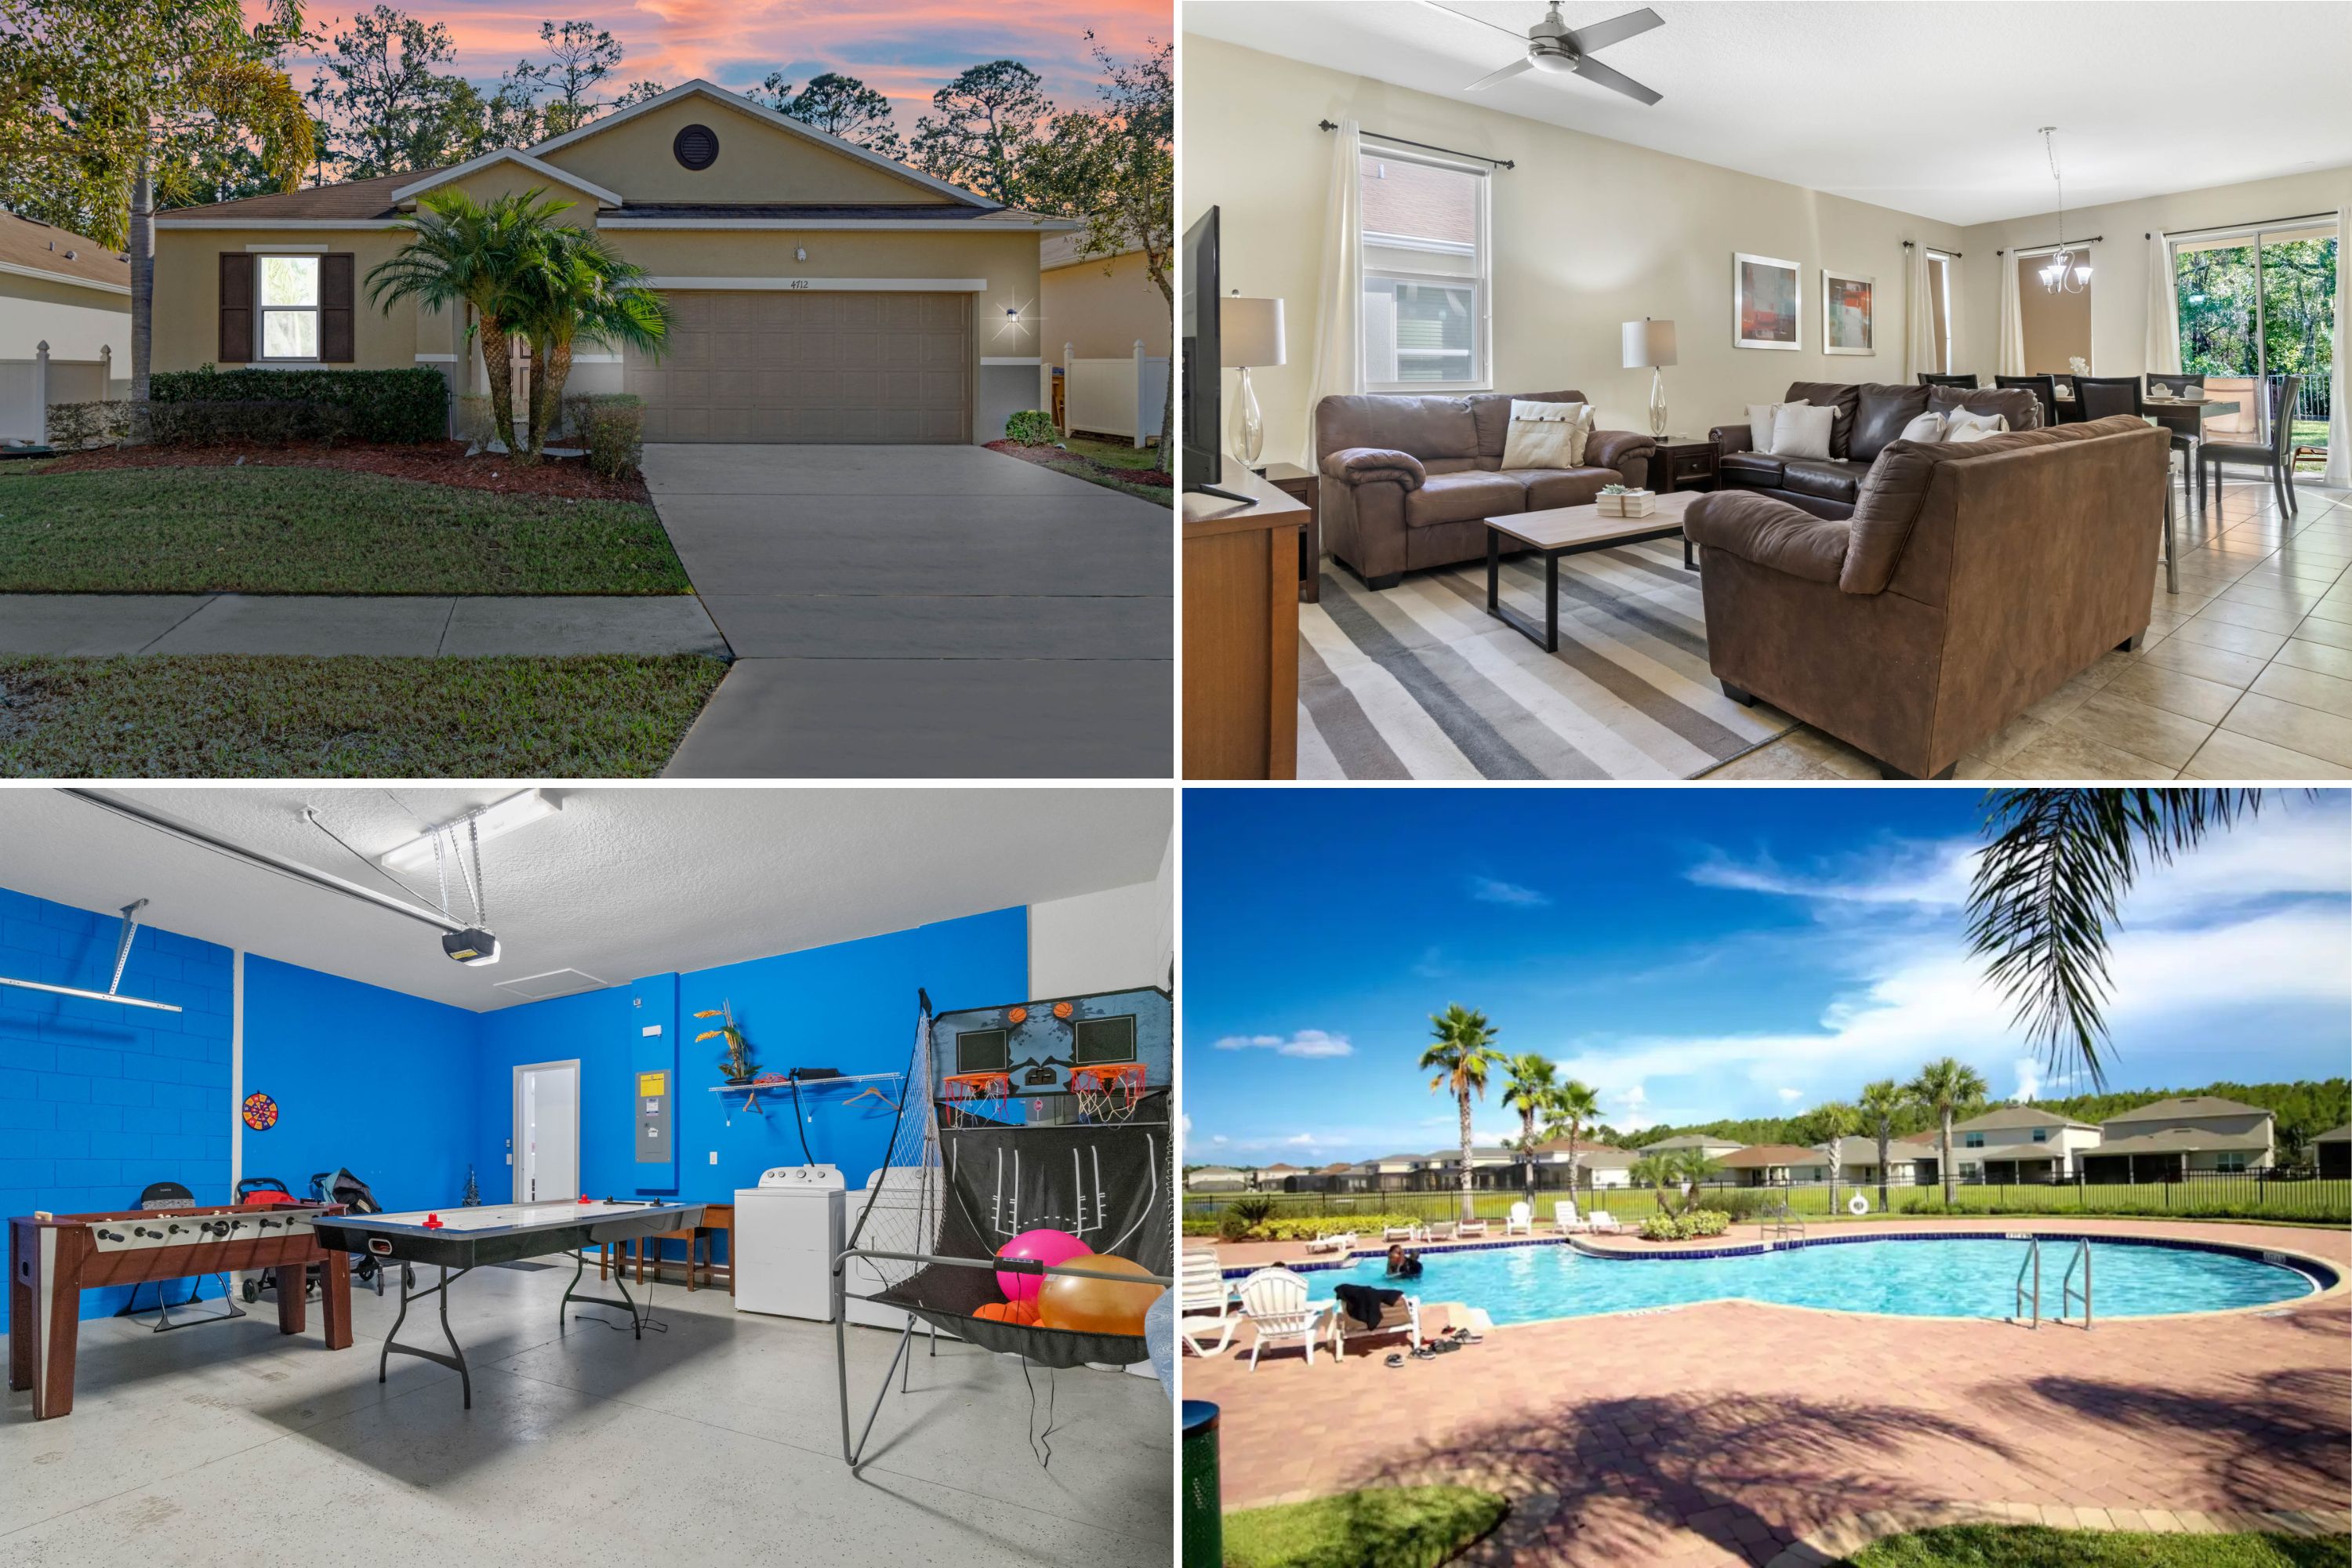 Property Image 1 - 4 Bedrooms / 3 Bathrooms / Crystal Cove (4712 BD)